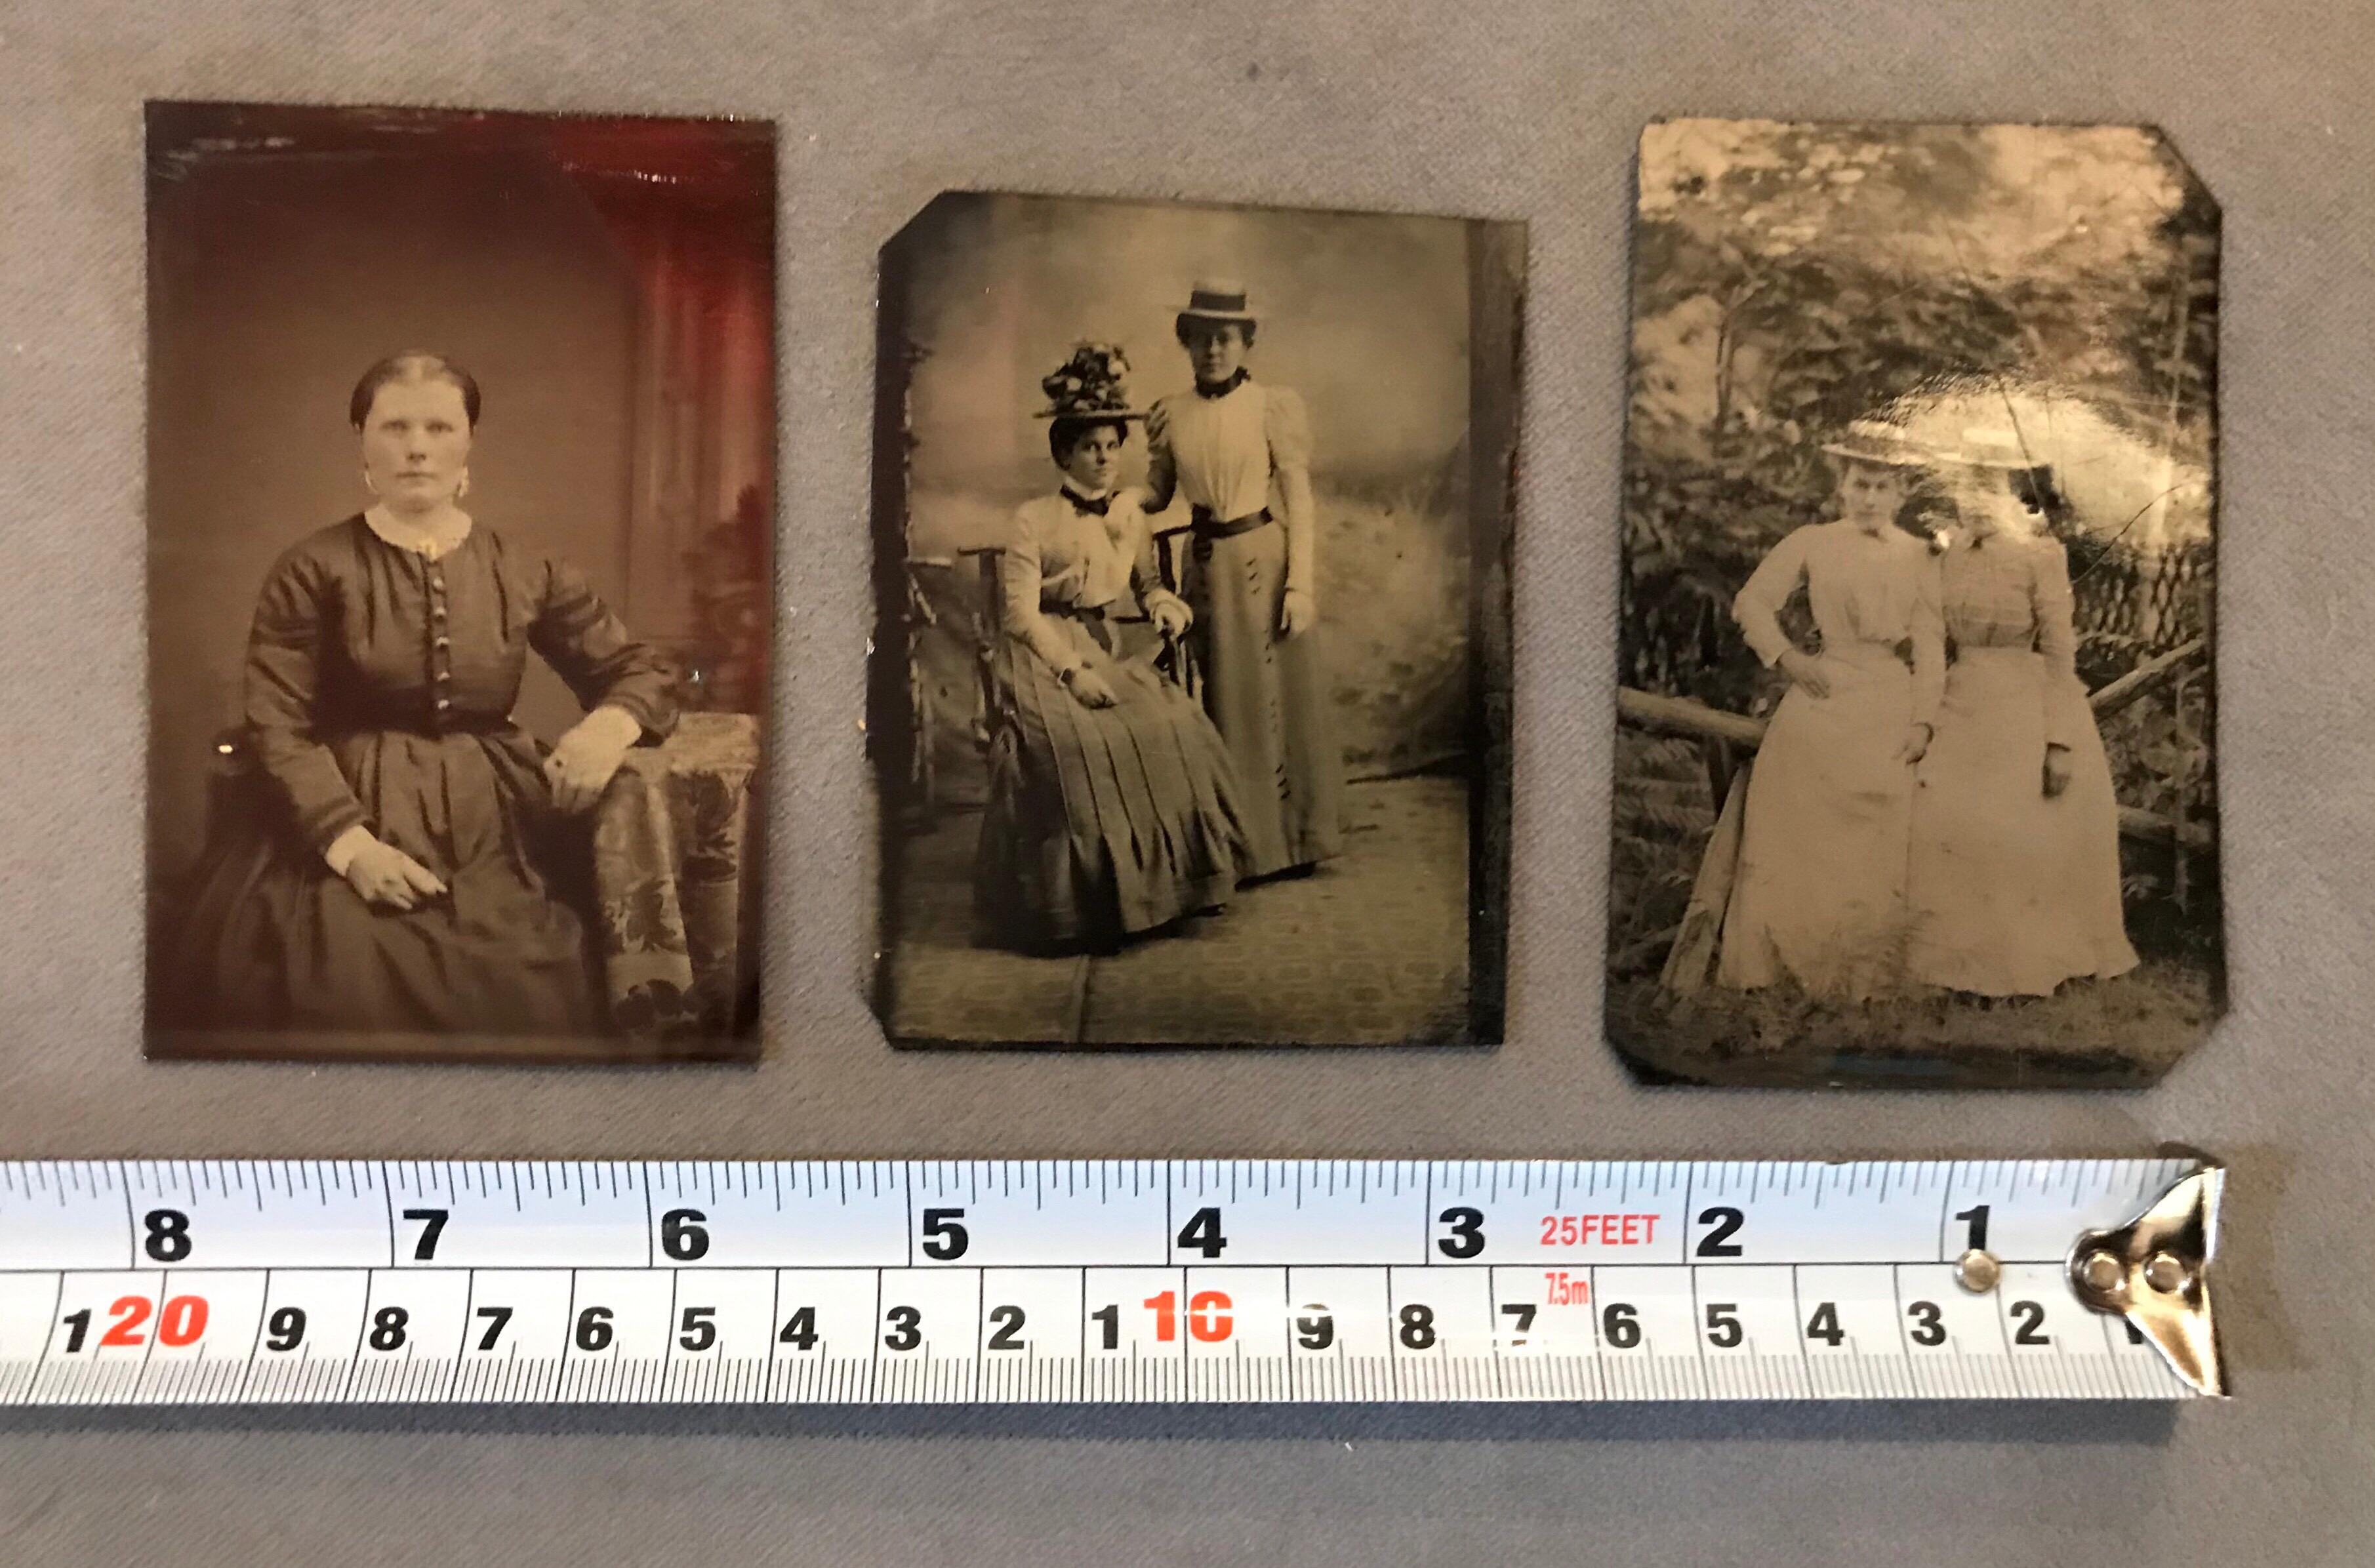 Set of three antique tintypes of women. Price is for all 3 as a set. 
A tintype is a photograph made by creating a direct positive on a thin sheet of metal coated with a dark lacquer or enamel and used as the support for the photographic emulsion.